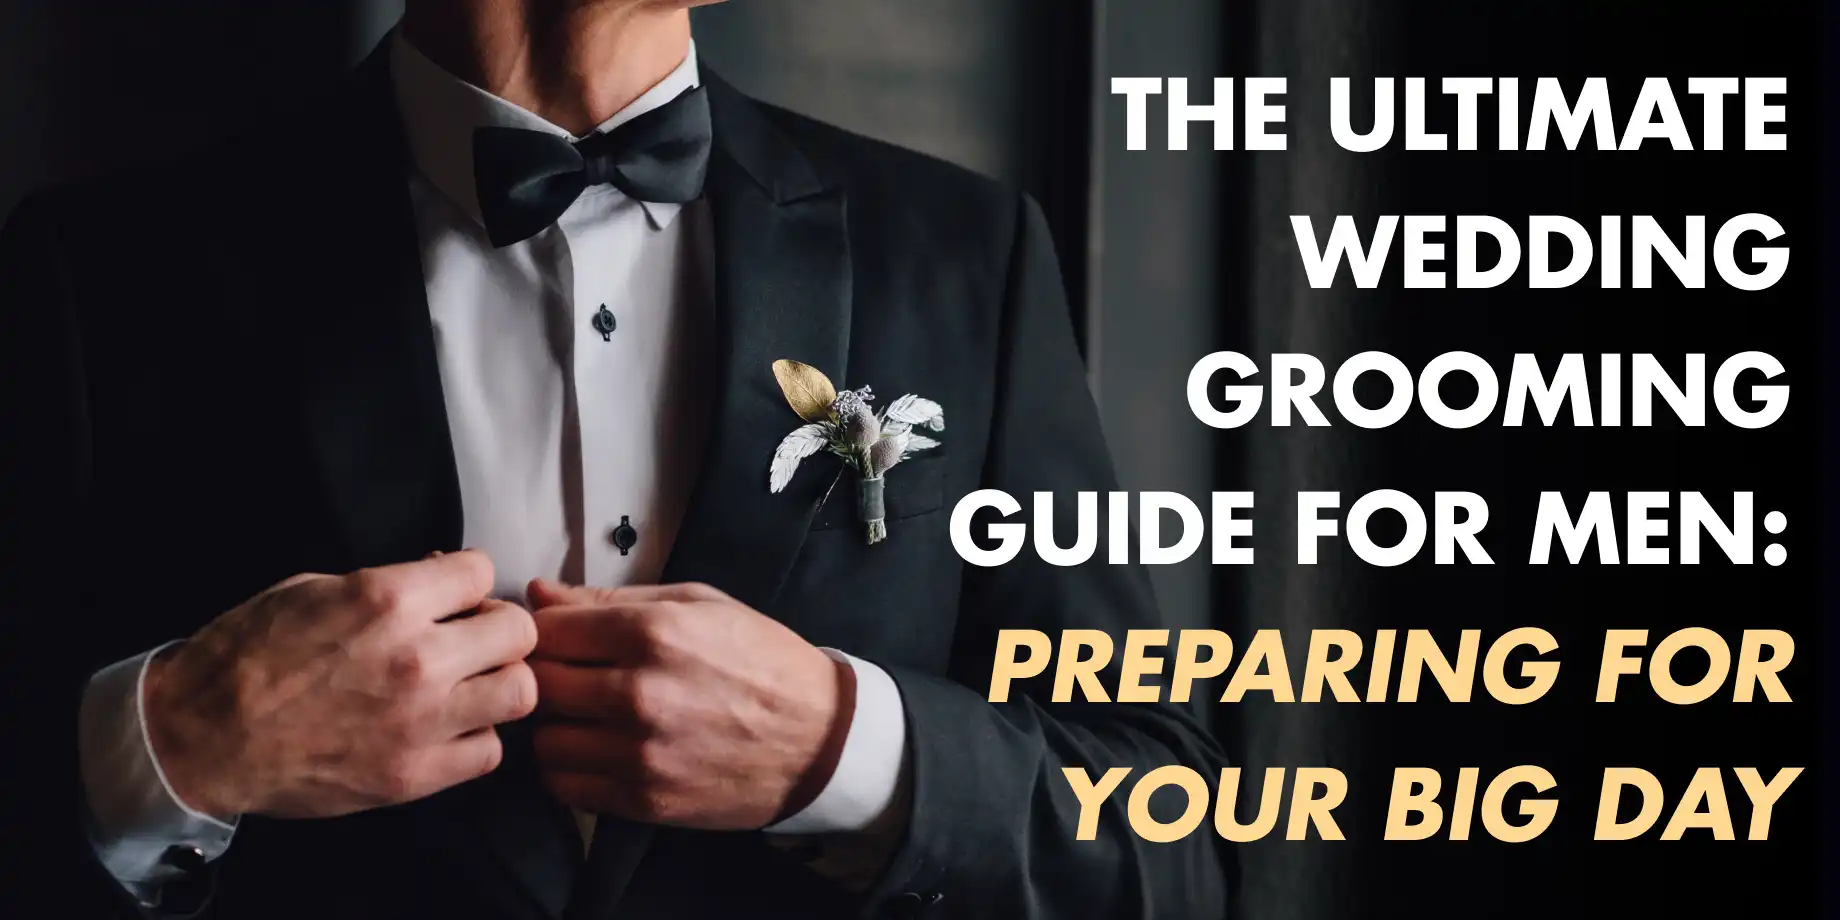 The Ultimate Wedding Grooming Guide for Men: Preparing for Your Big Day